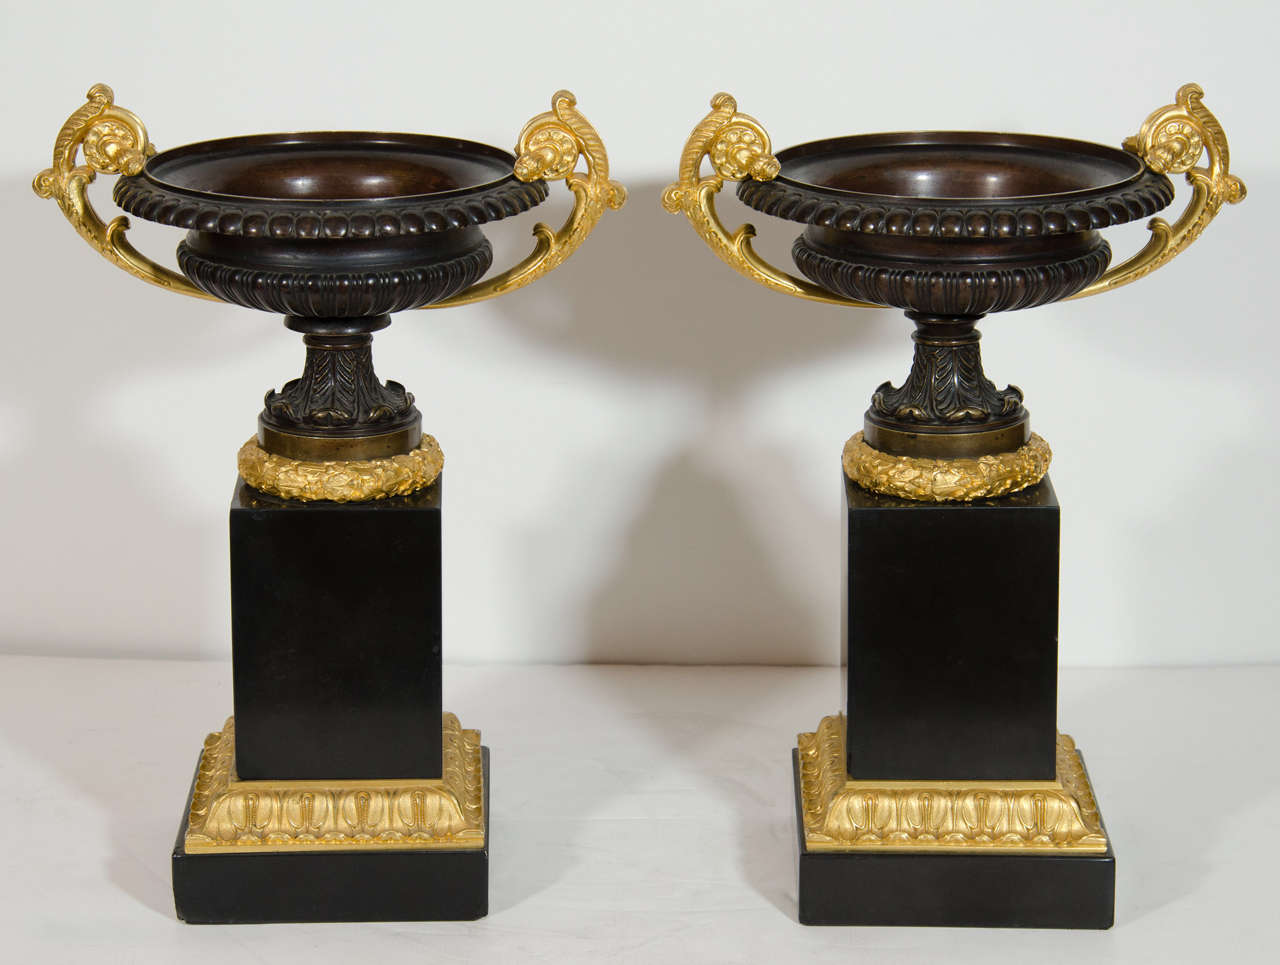 Pair of fine antique French gilt bronze, patina bronze, black marble neoclassical champagne form urns of superb quality embellished on square hand carved black marble bases and further adorned with neoclassical gilt bronze handles.